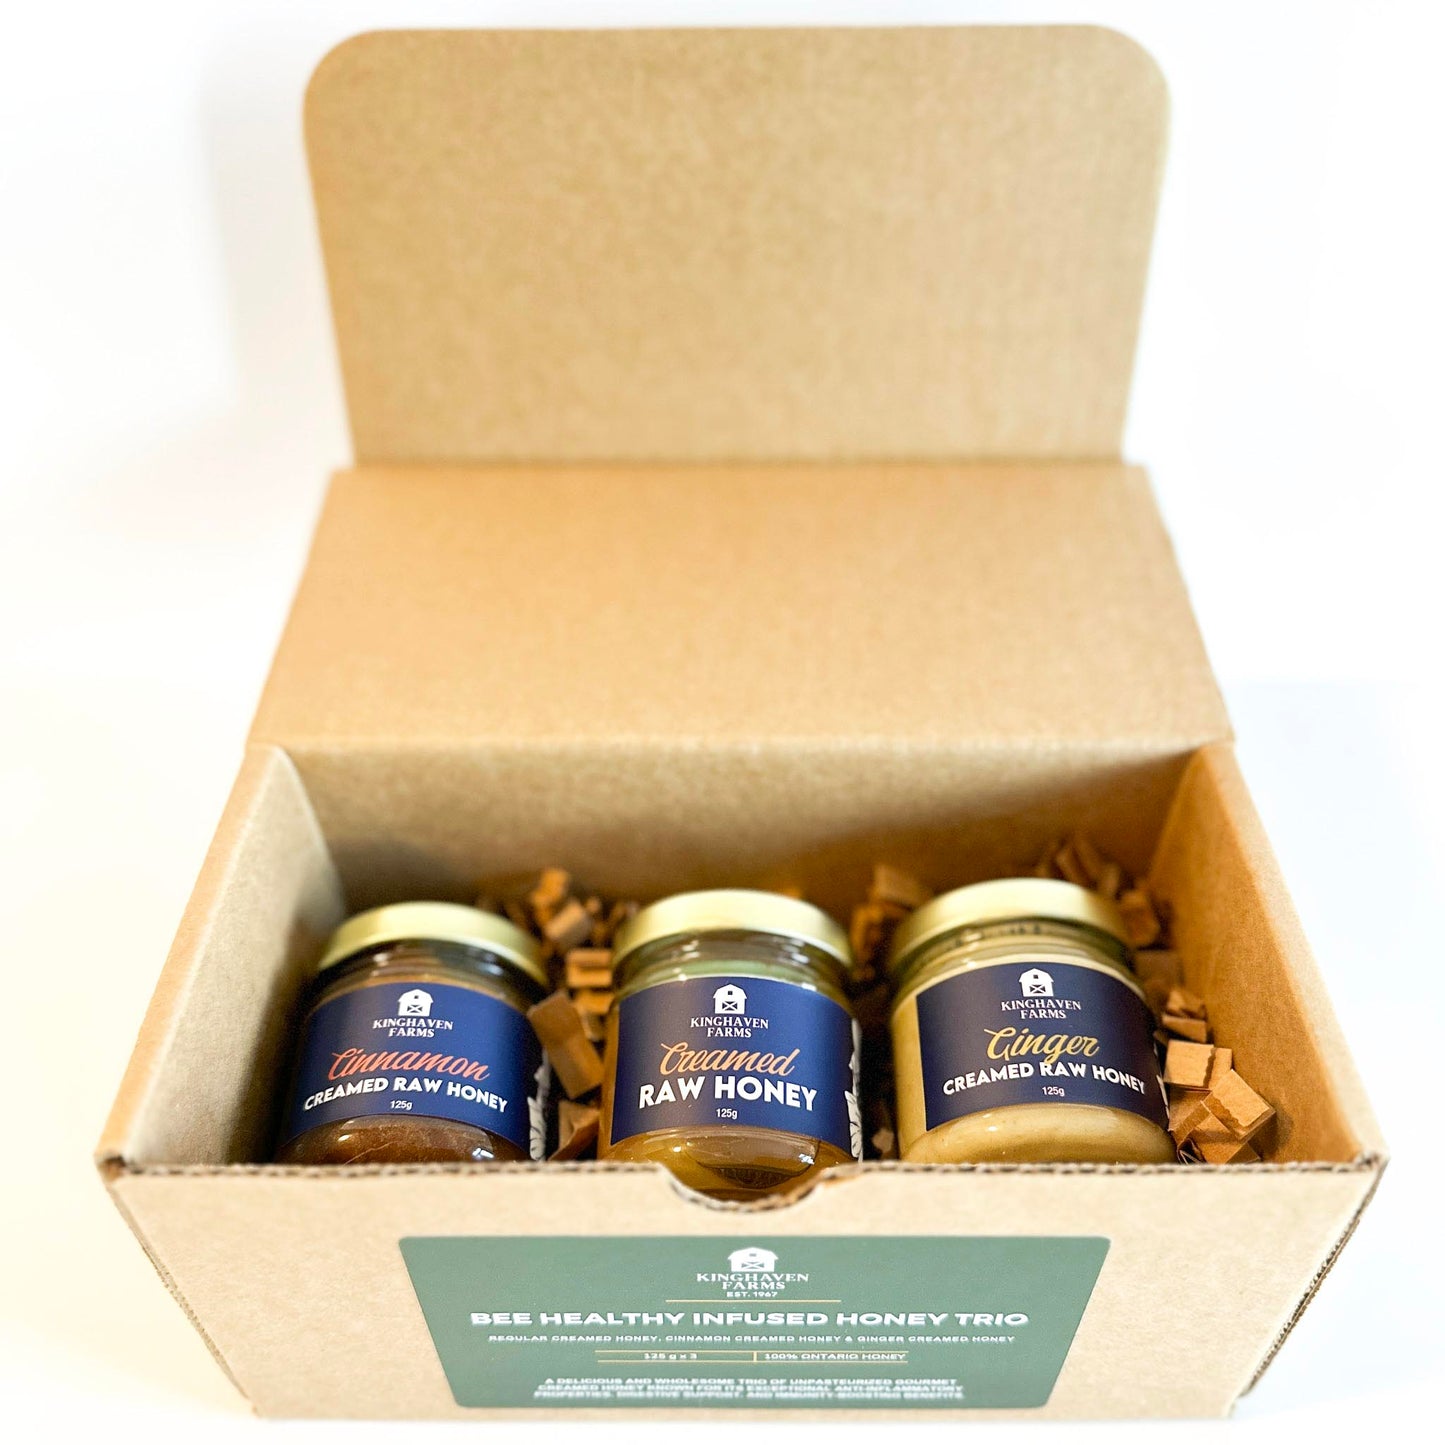 Kinghaven Farms Bee Healthy Infused Honey Trio